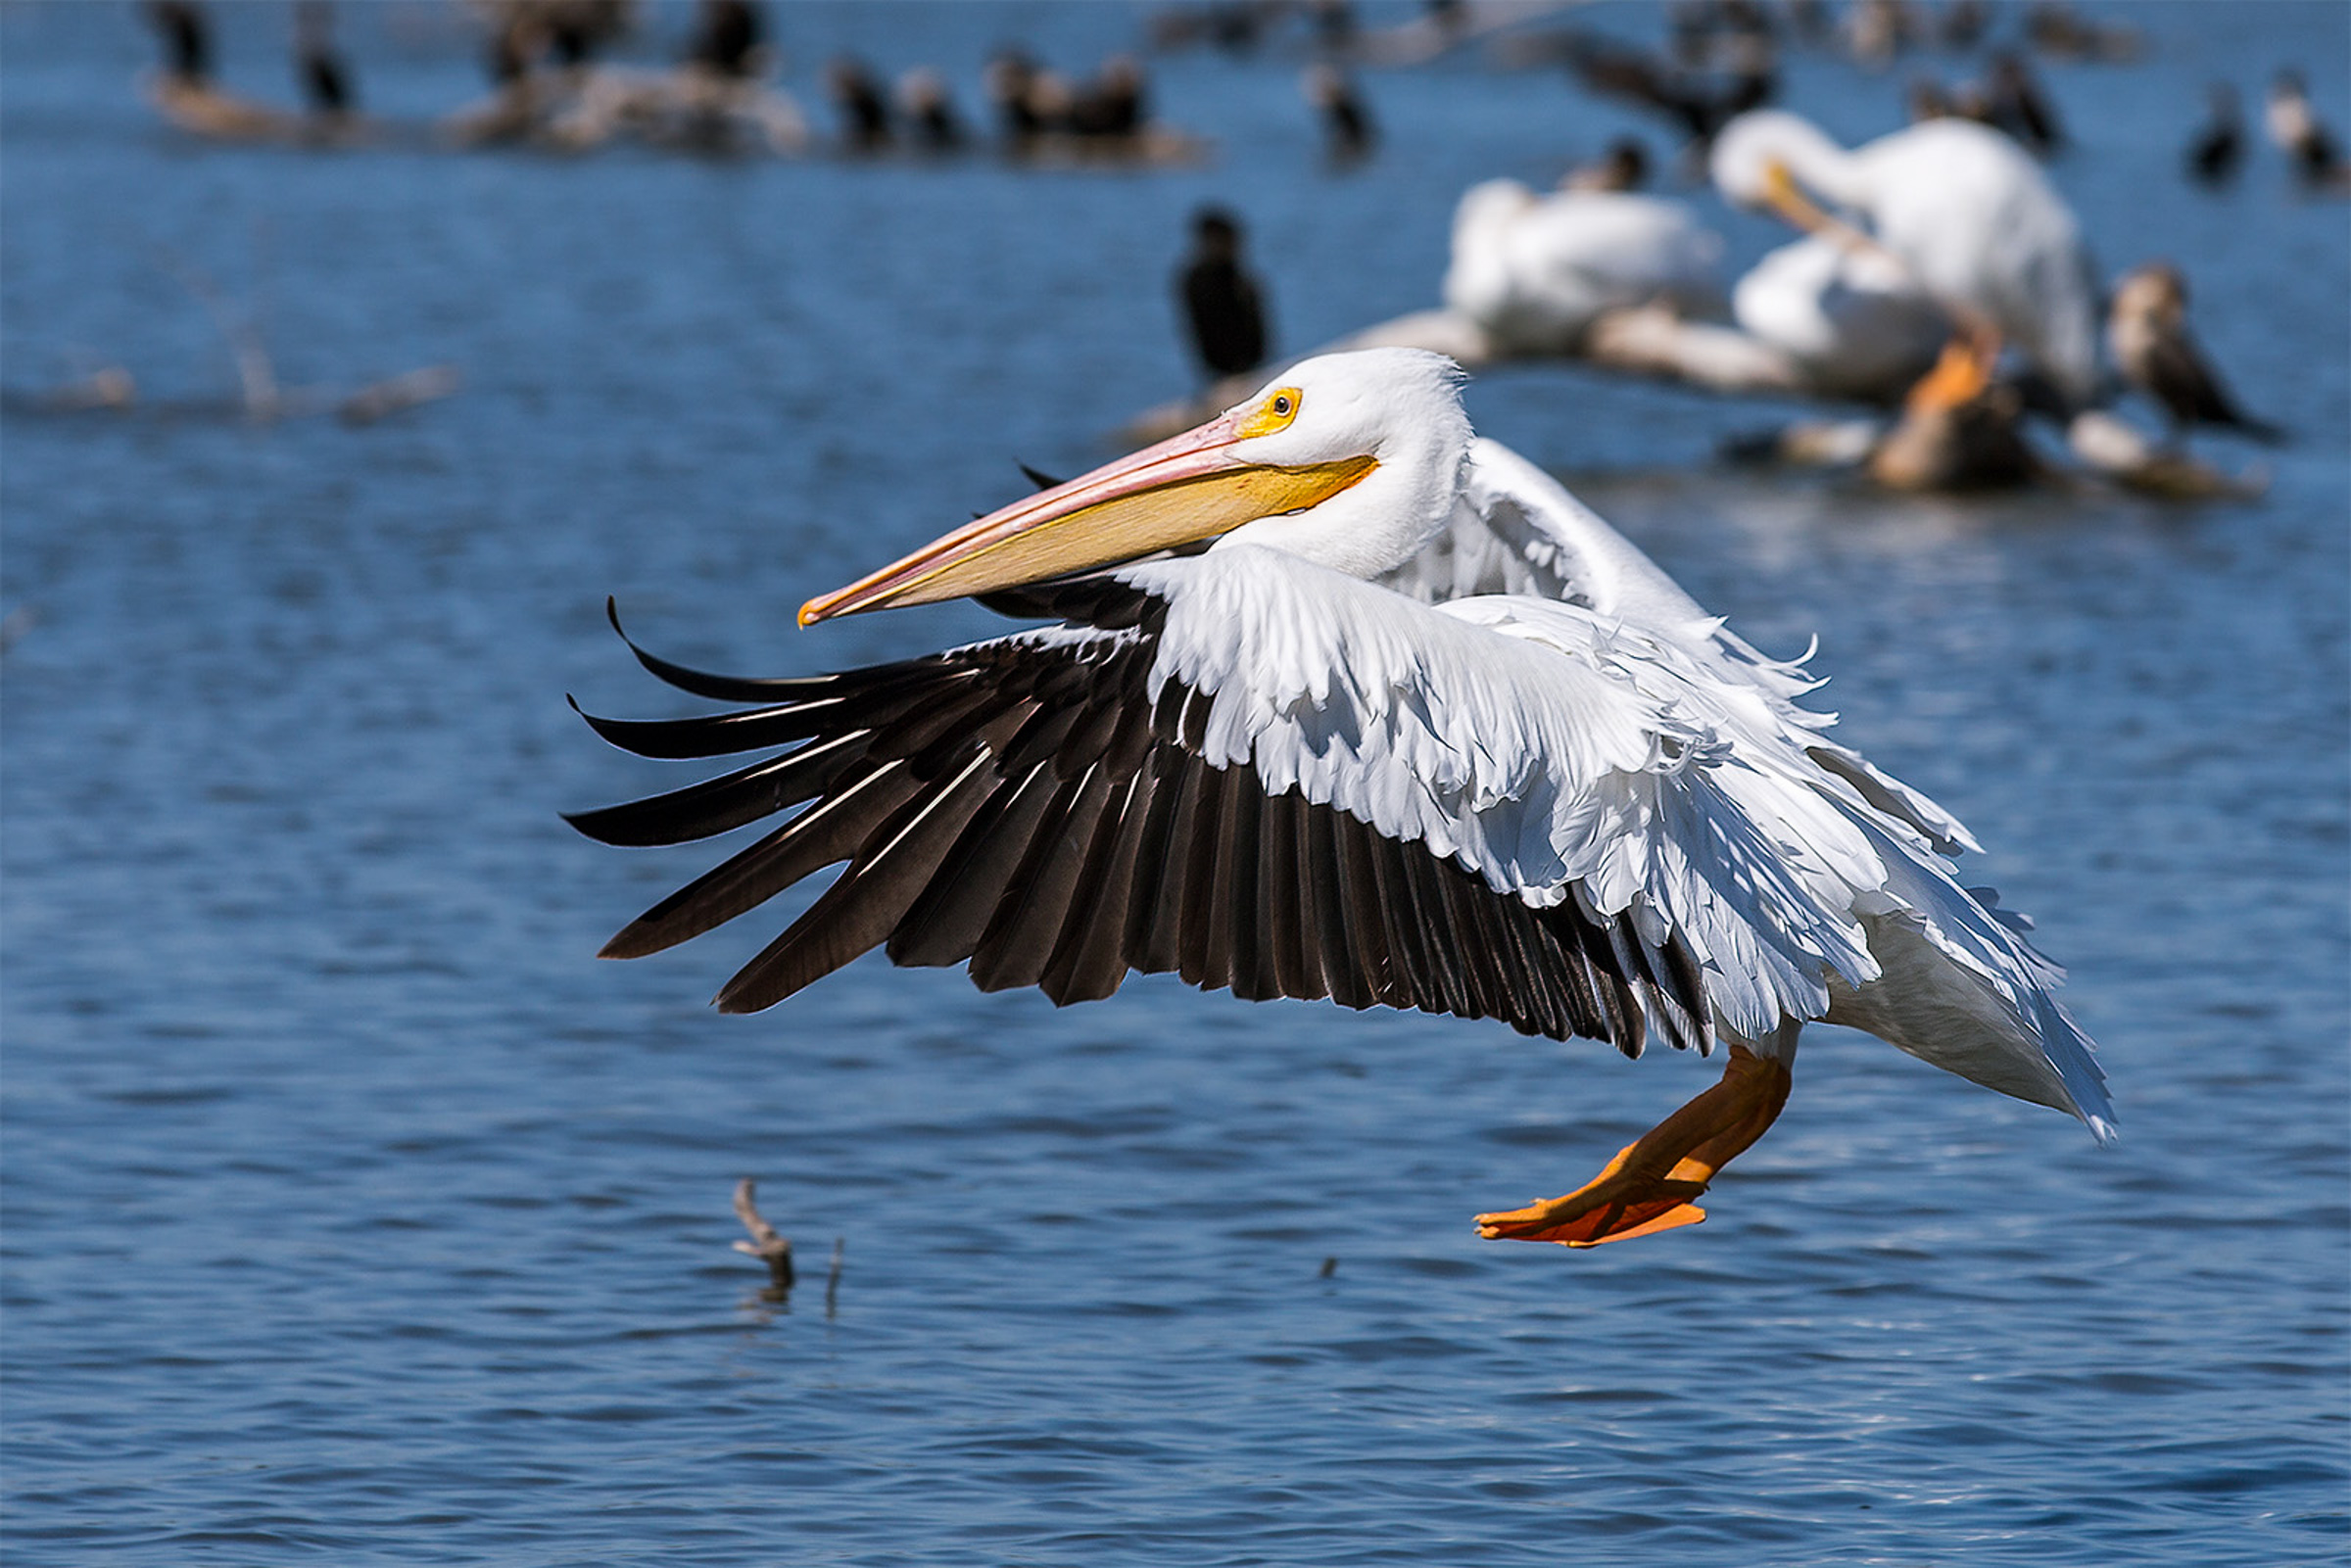 American White Pelican about to land in the water. Photo: Shantel Rich/Audubon Photography Awards.